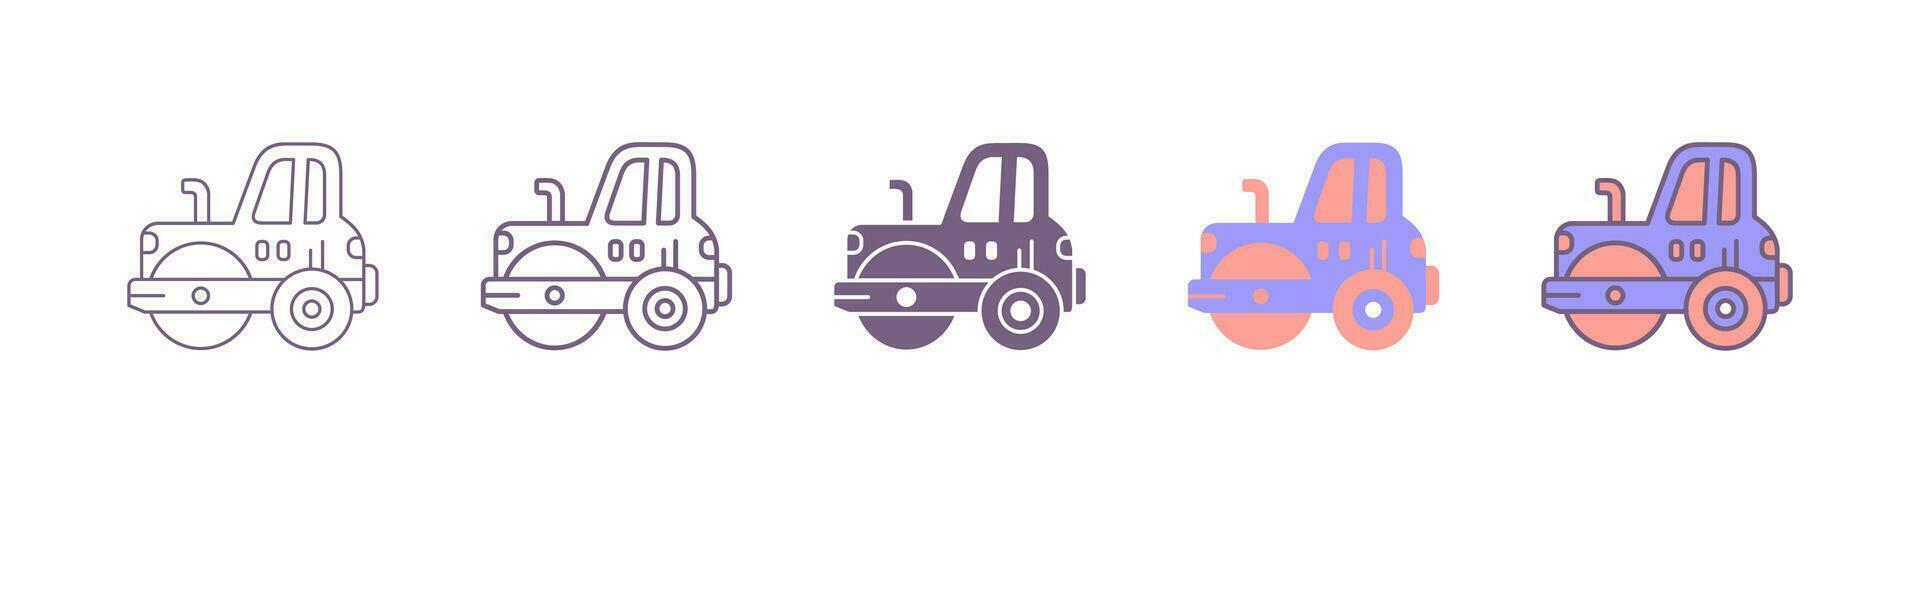 road roller icon. Thin, Light Regular Flat And Bold style design isolated on white background. road roller icon with 5 different styles vector